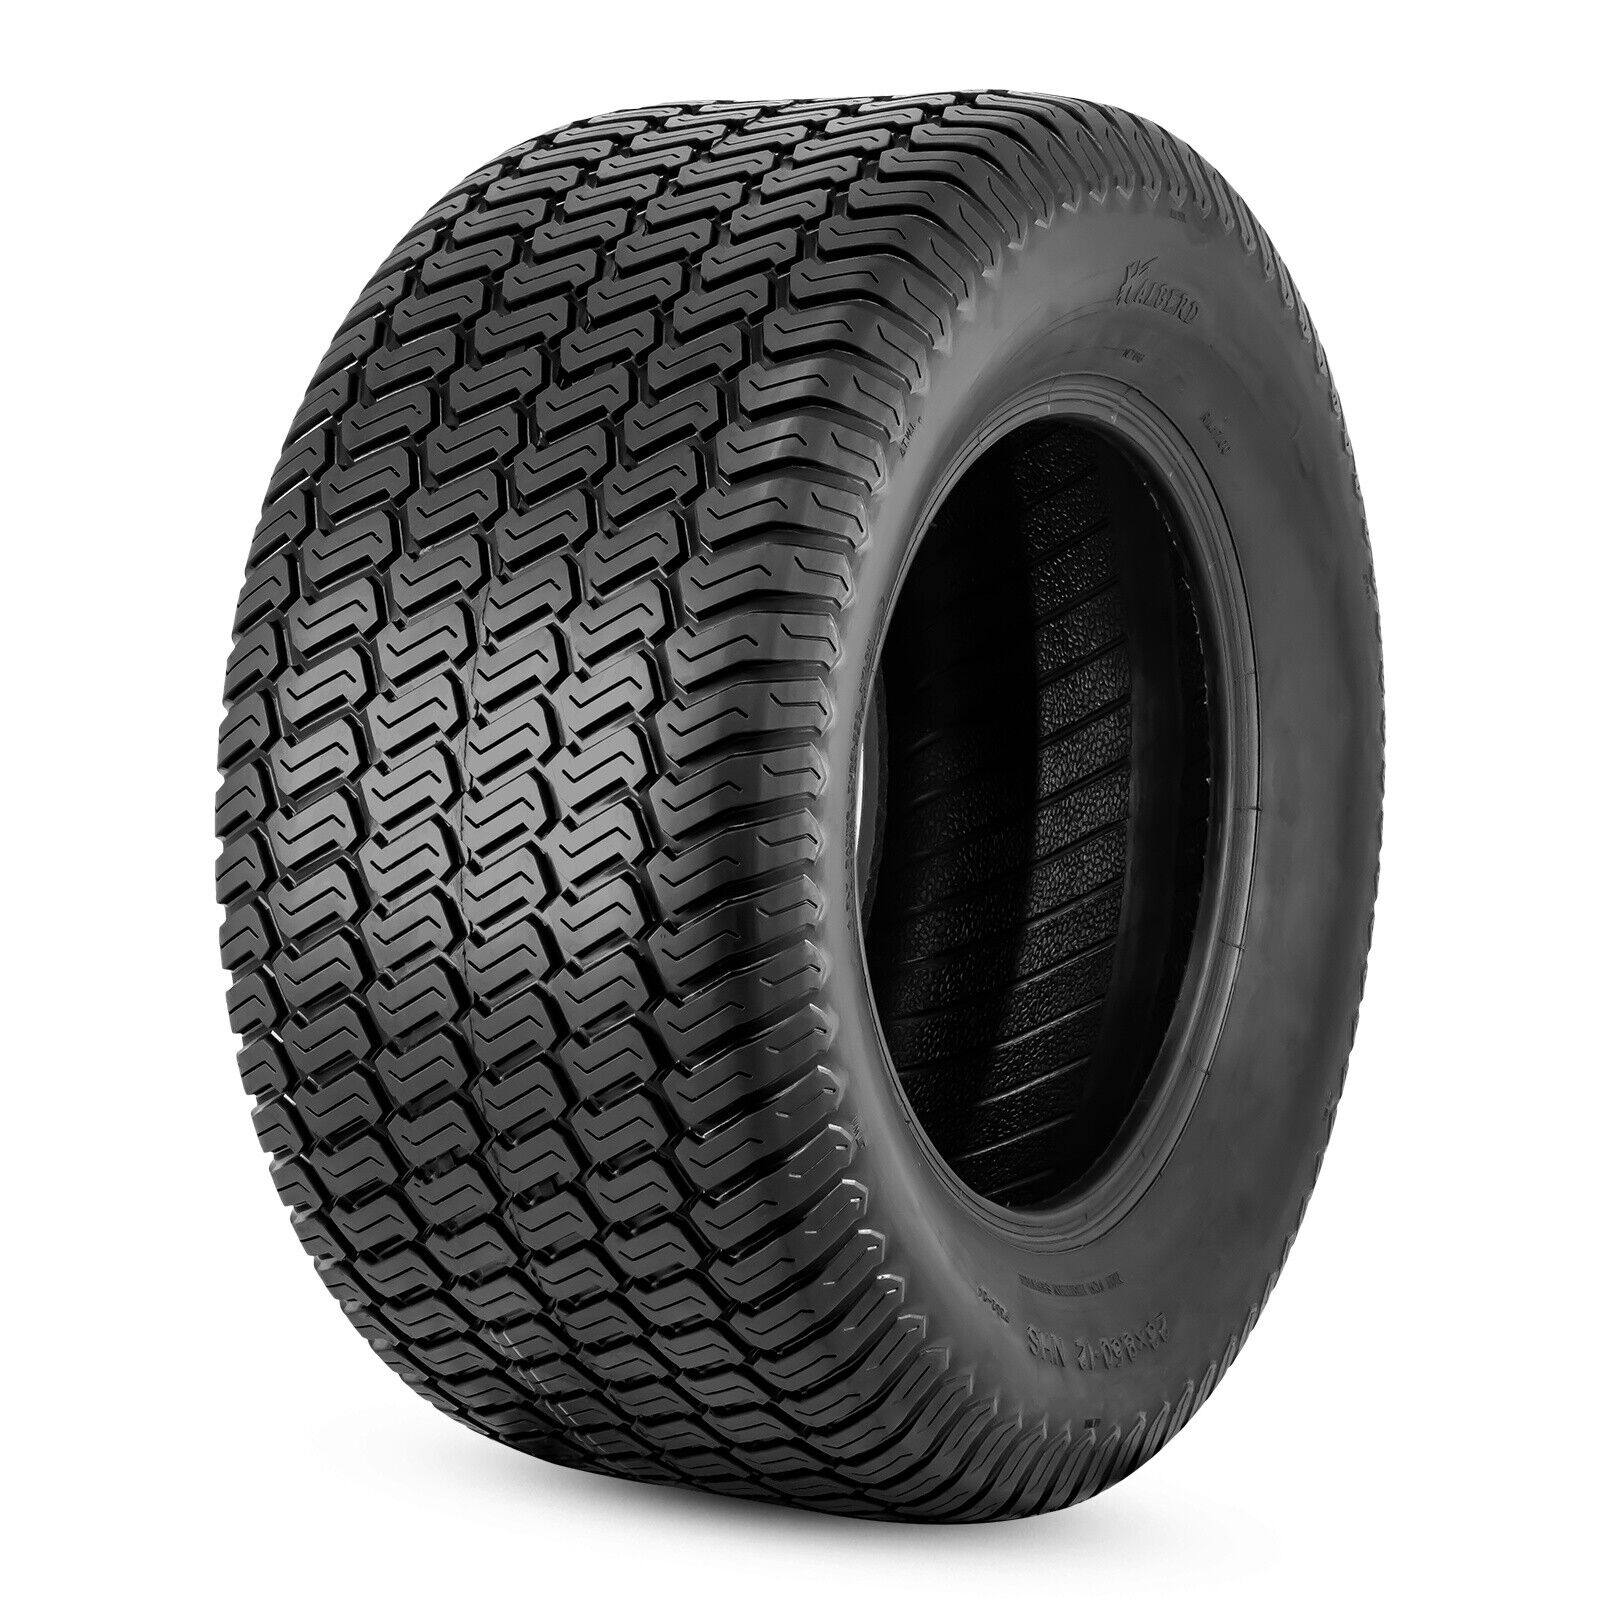 4PLY 23x9.50-12 Lawn Mower Tires 23x9.5x12 Heavy Duty Tubeless Turf Tractor Tyre